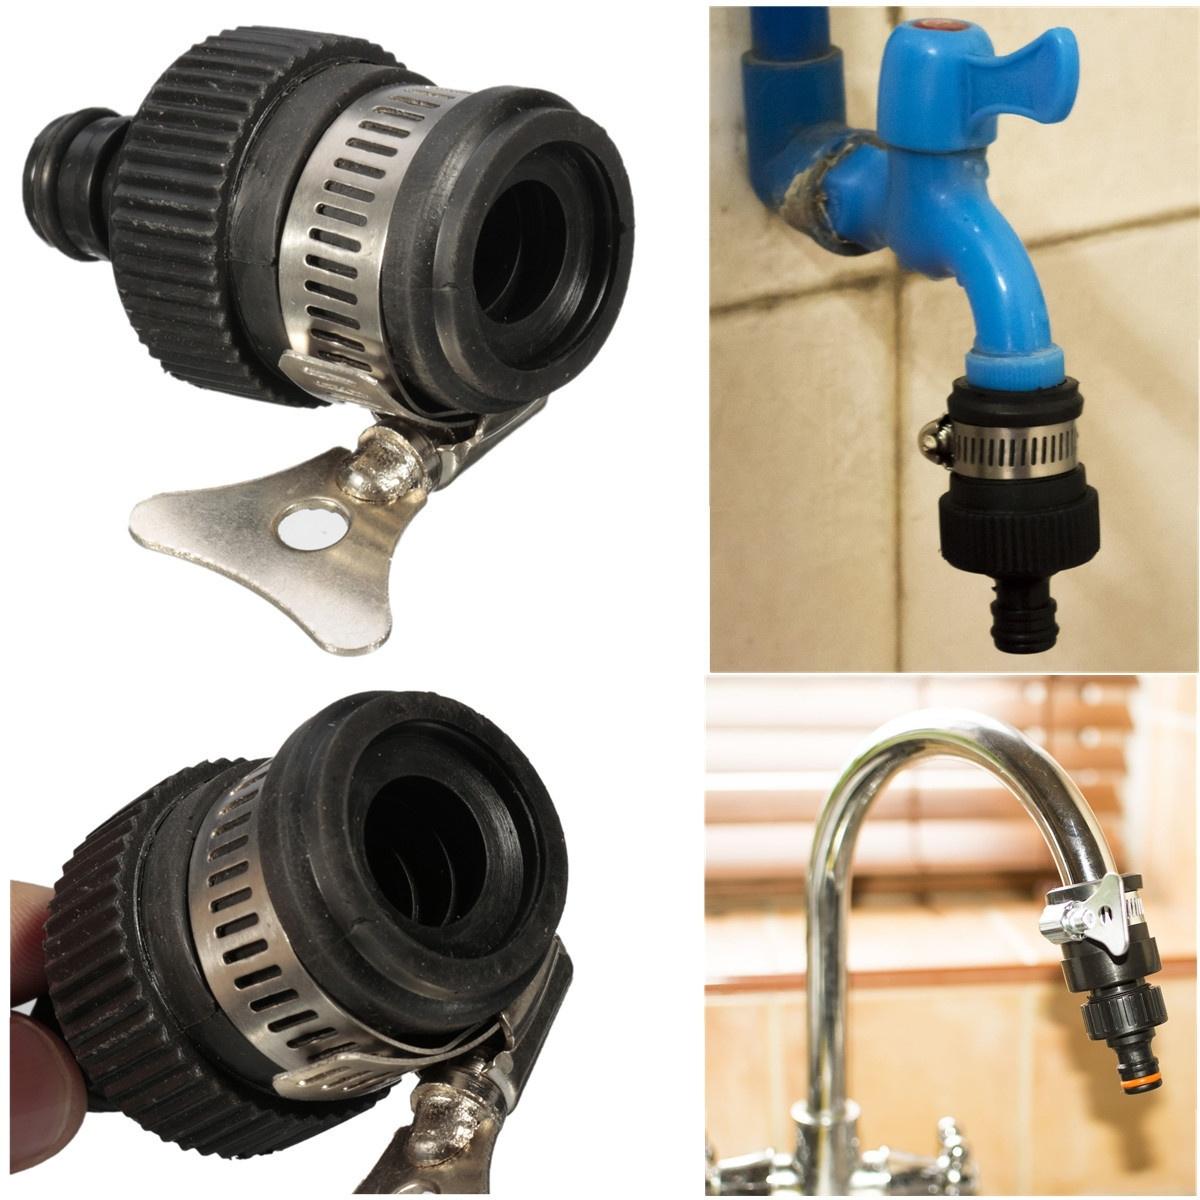 Universal 13 17mm Tap Connector Faucet, How To Connect Garden Hose Kitchen Tap